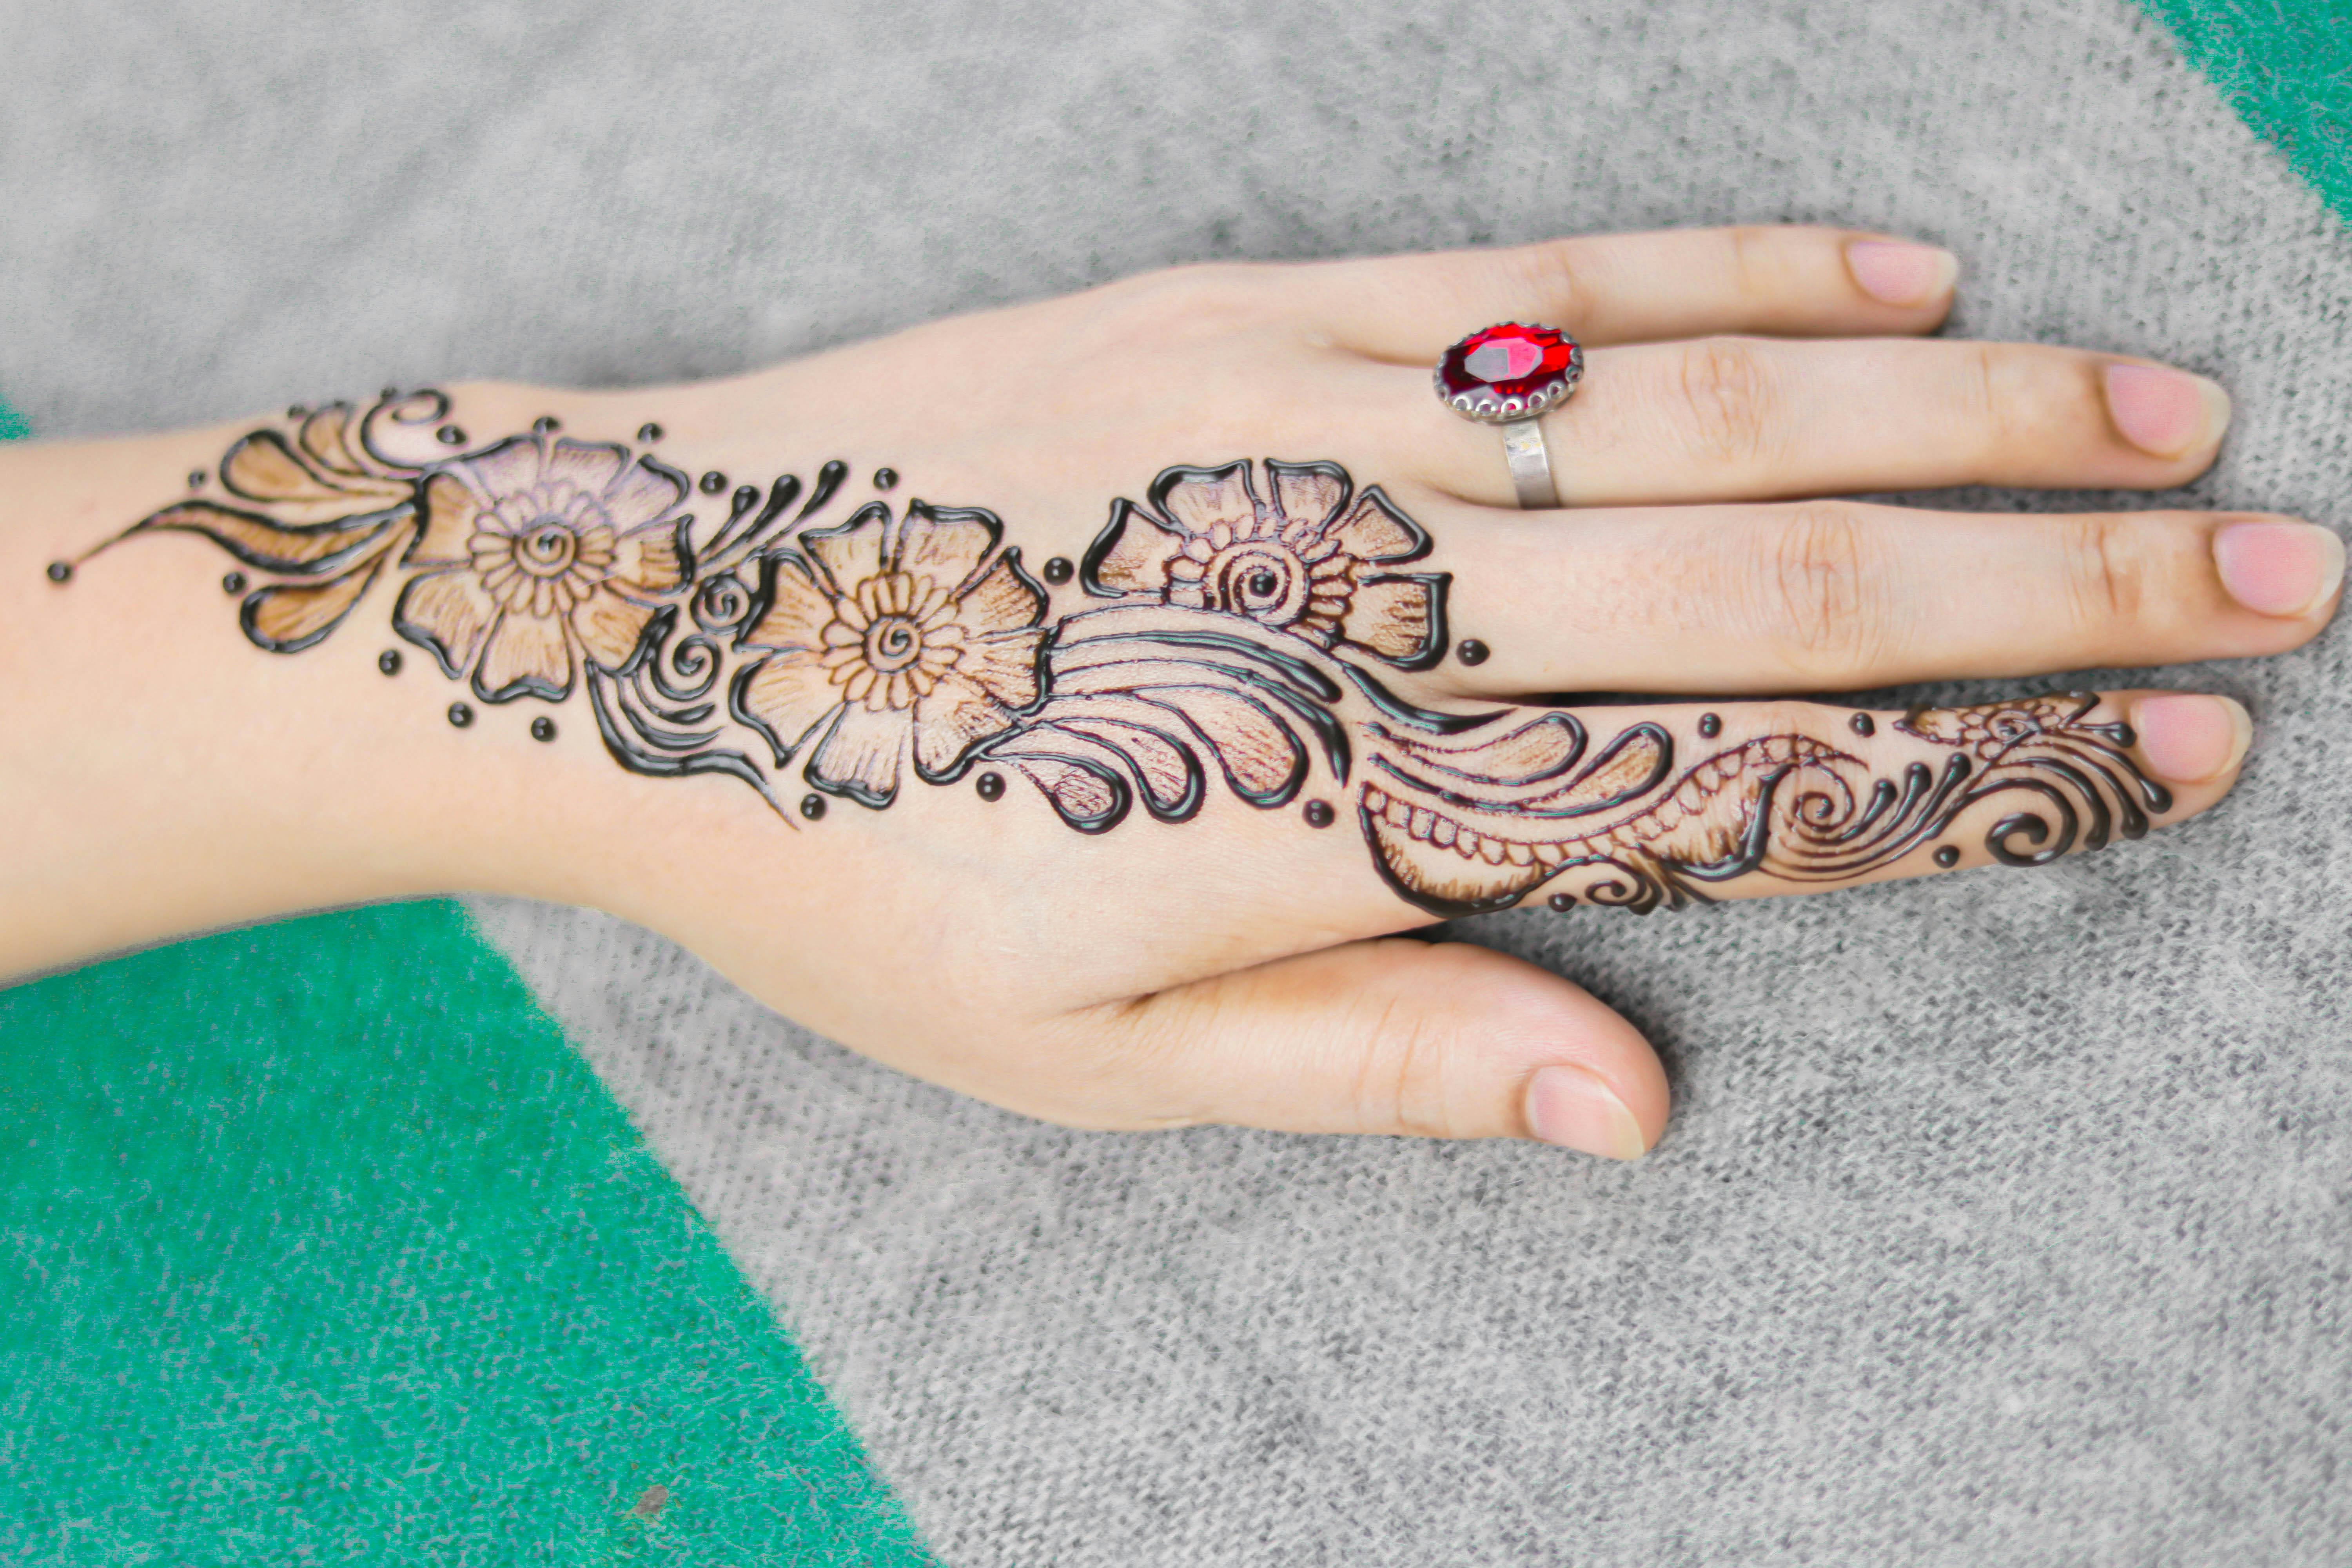 Traditional Floral Design Henna Tattoo on a Woman's Hand · Free Stock Photo